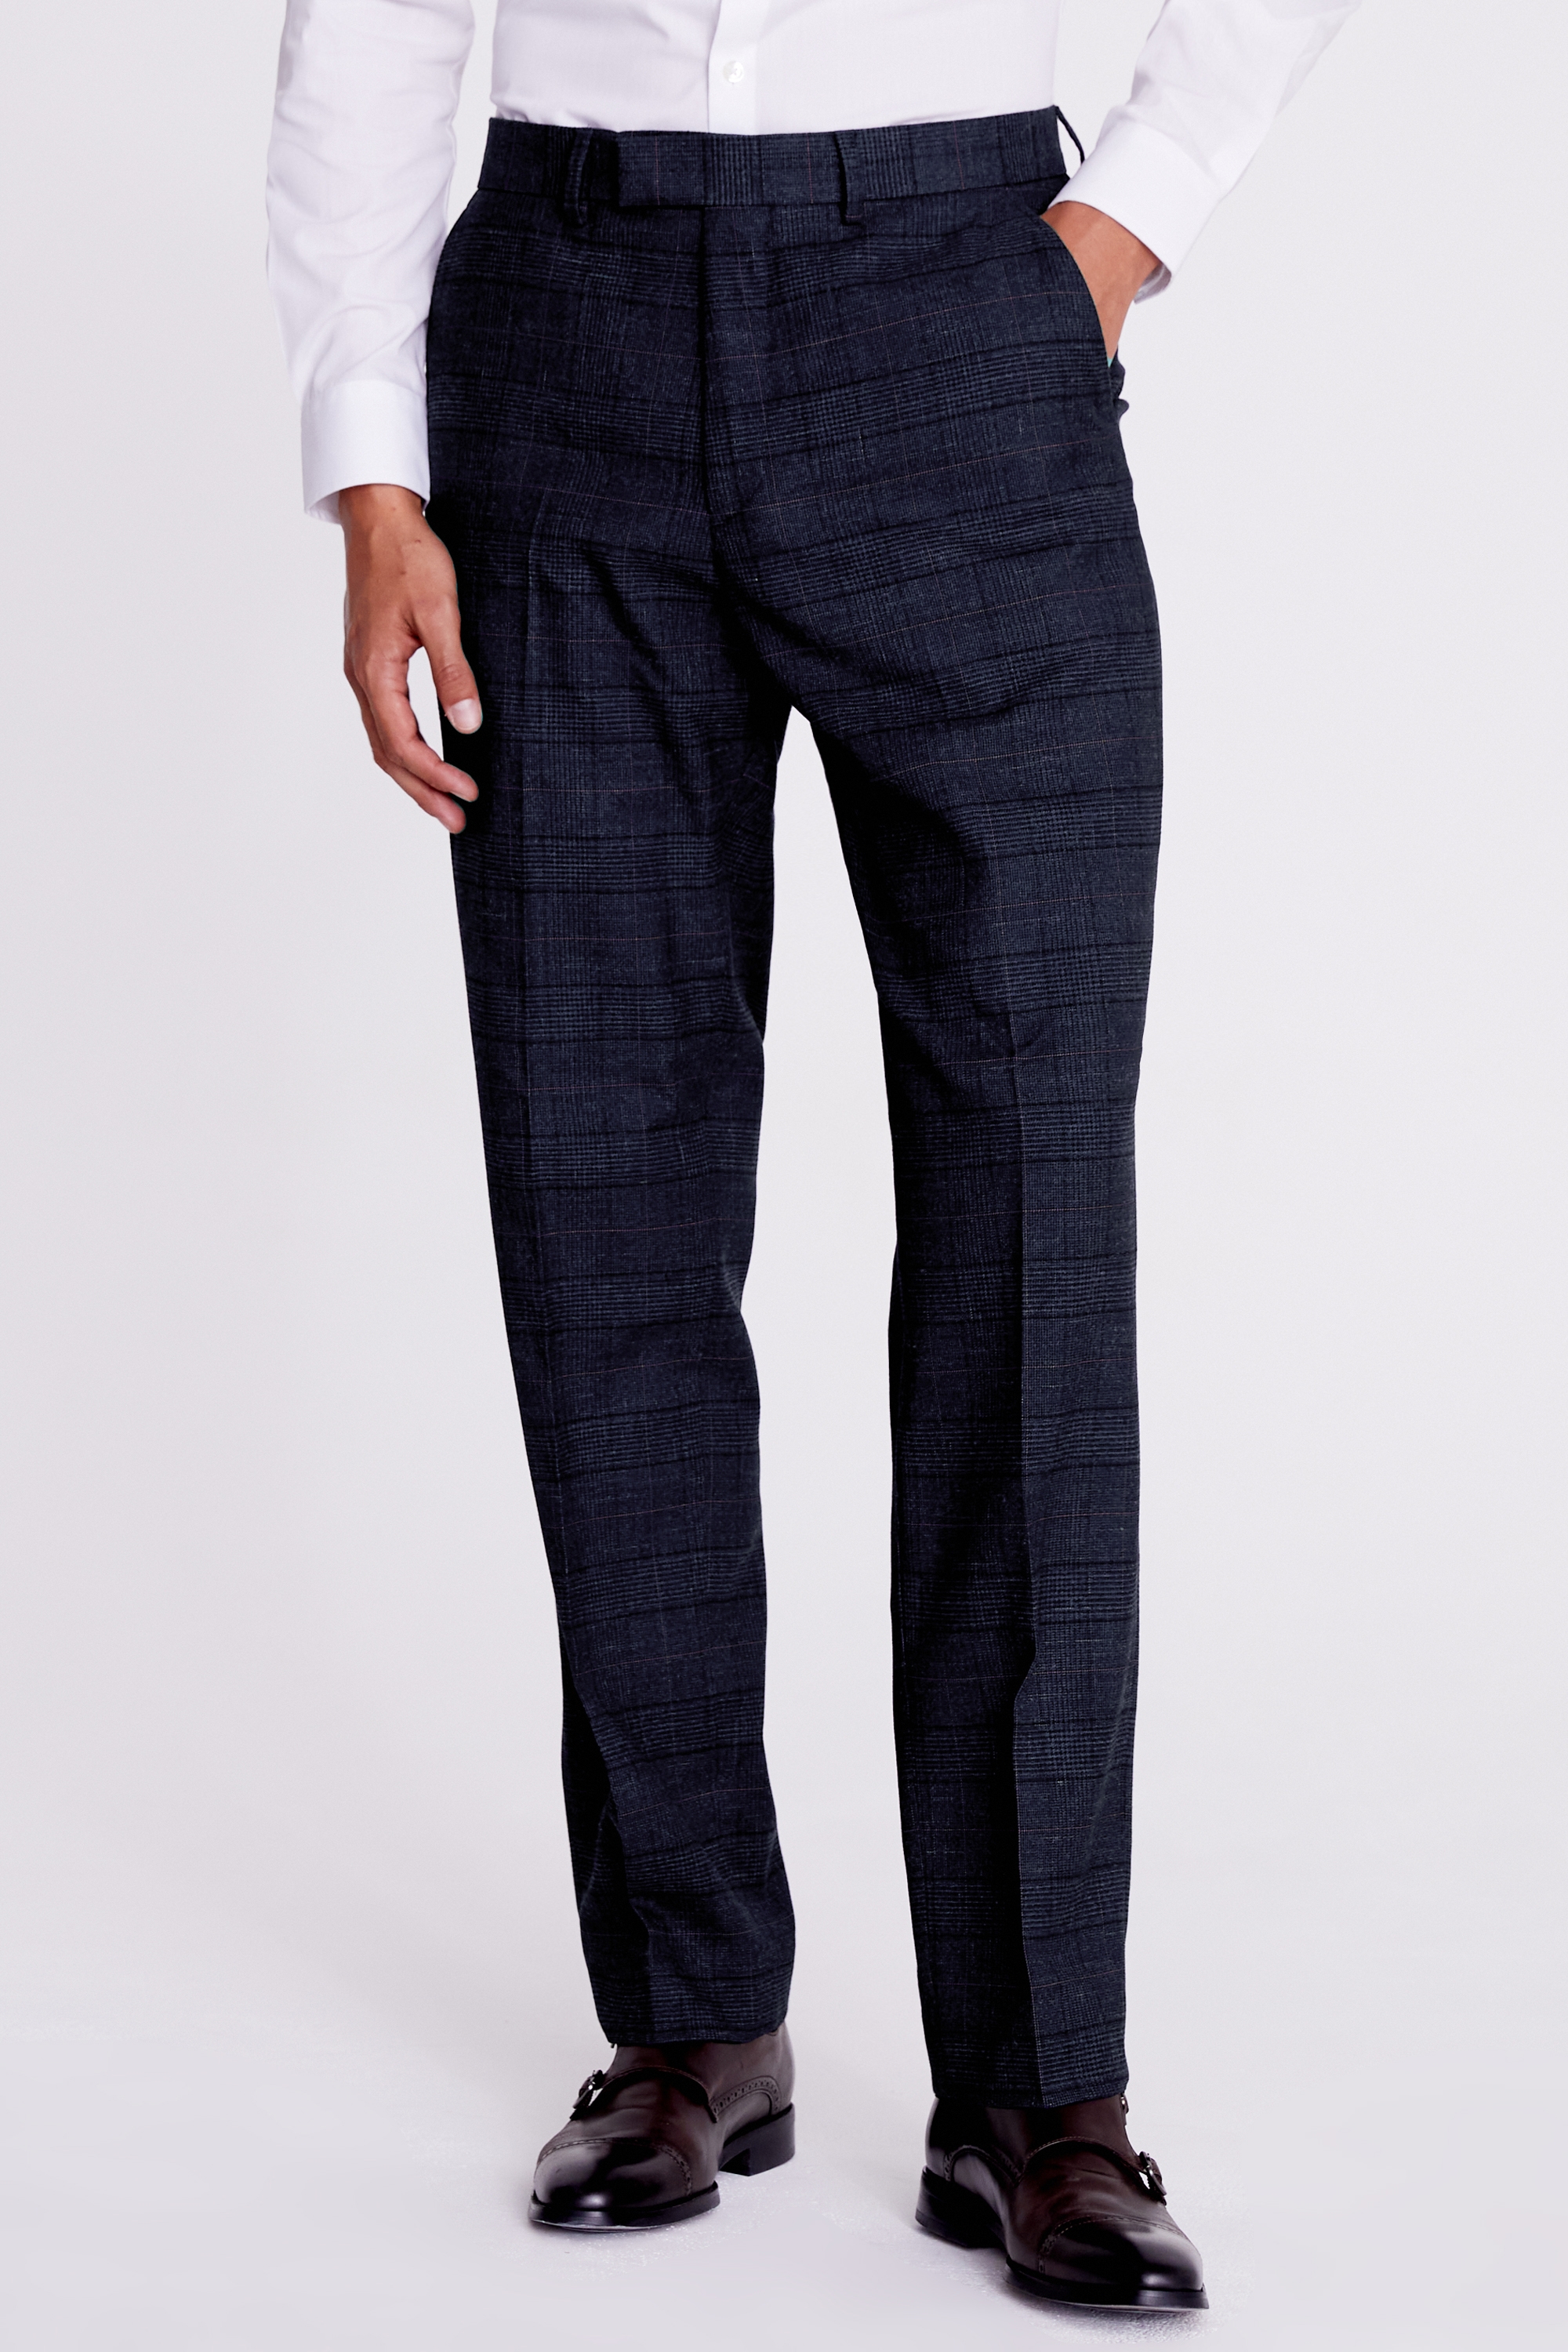 Regular Fit Navy Black Check Trousers | Buy Online at Moss